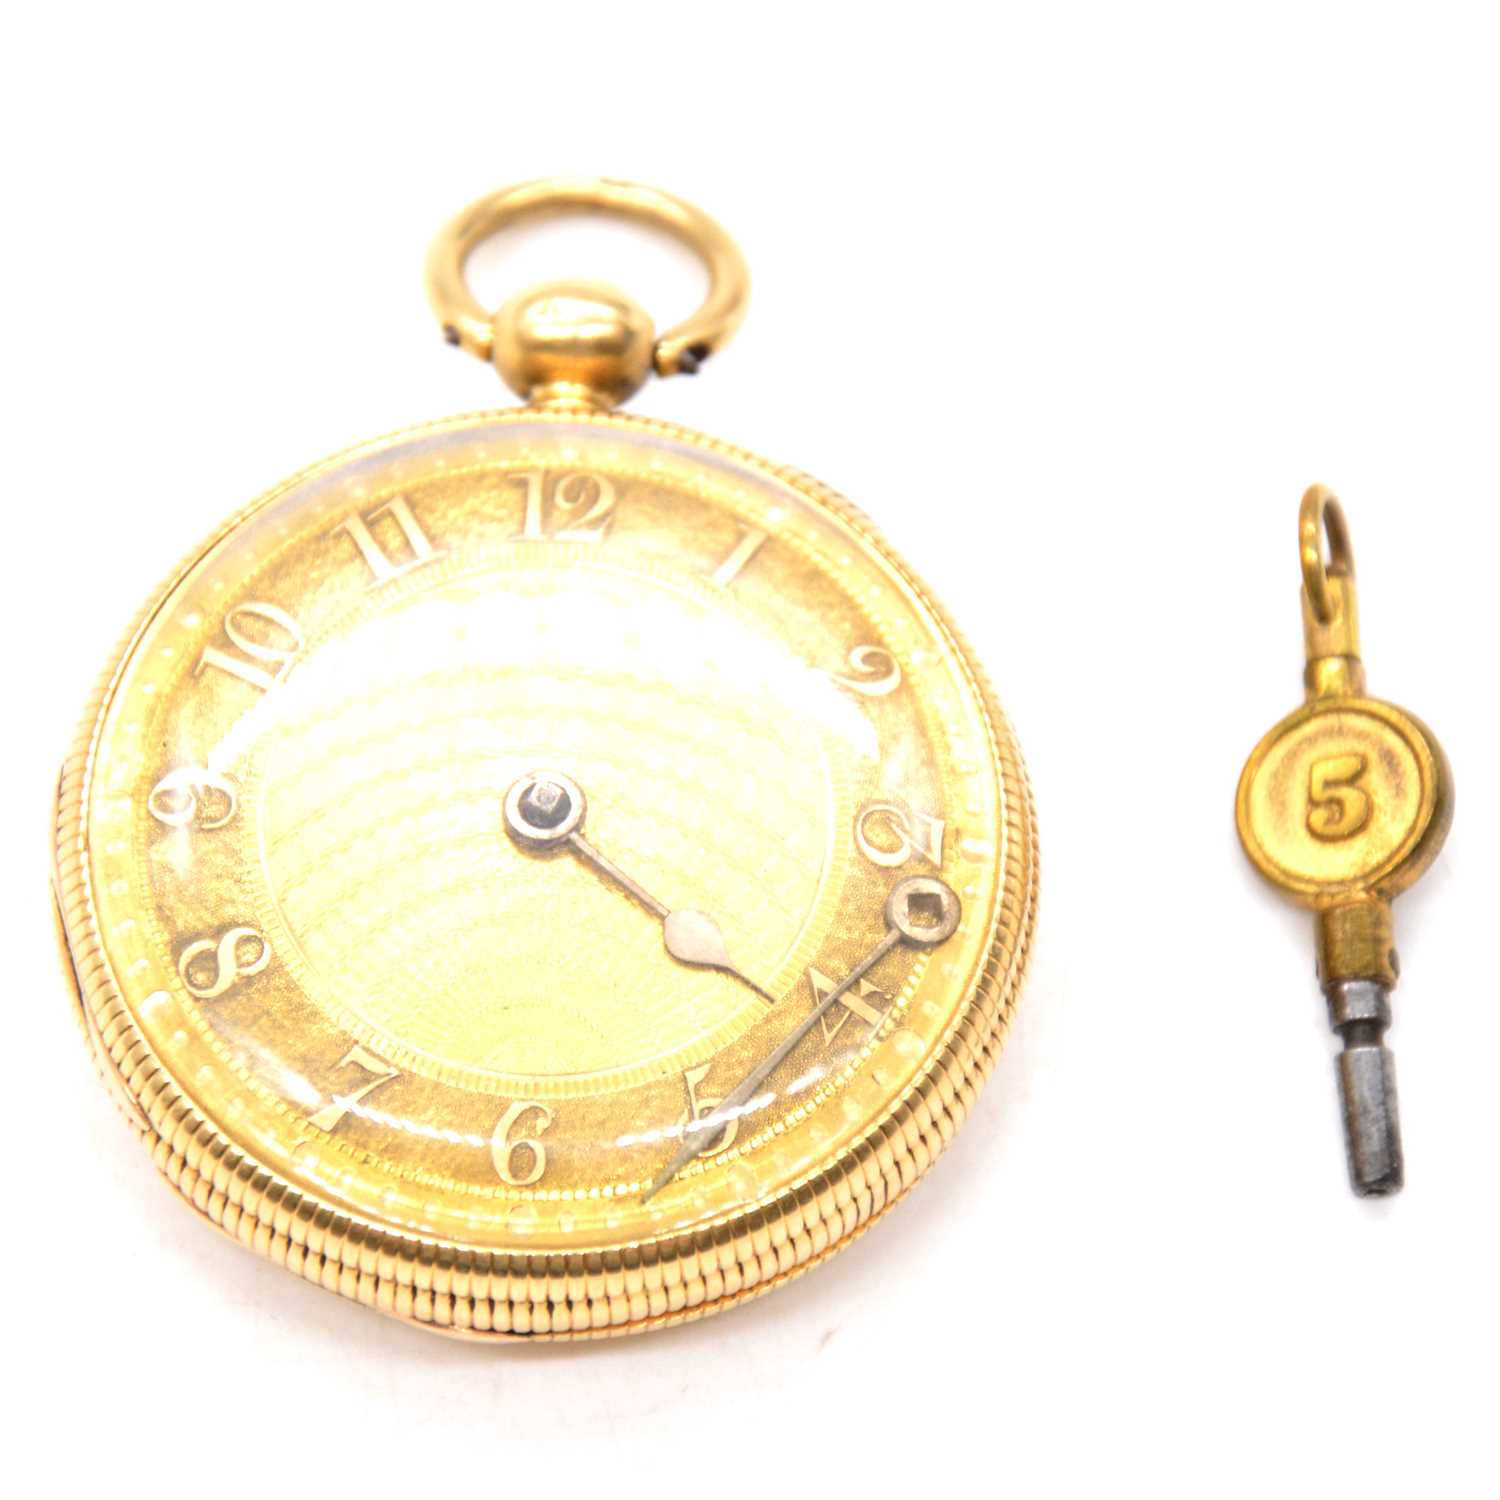 A George III 18 carat gold open face pocket watch.